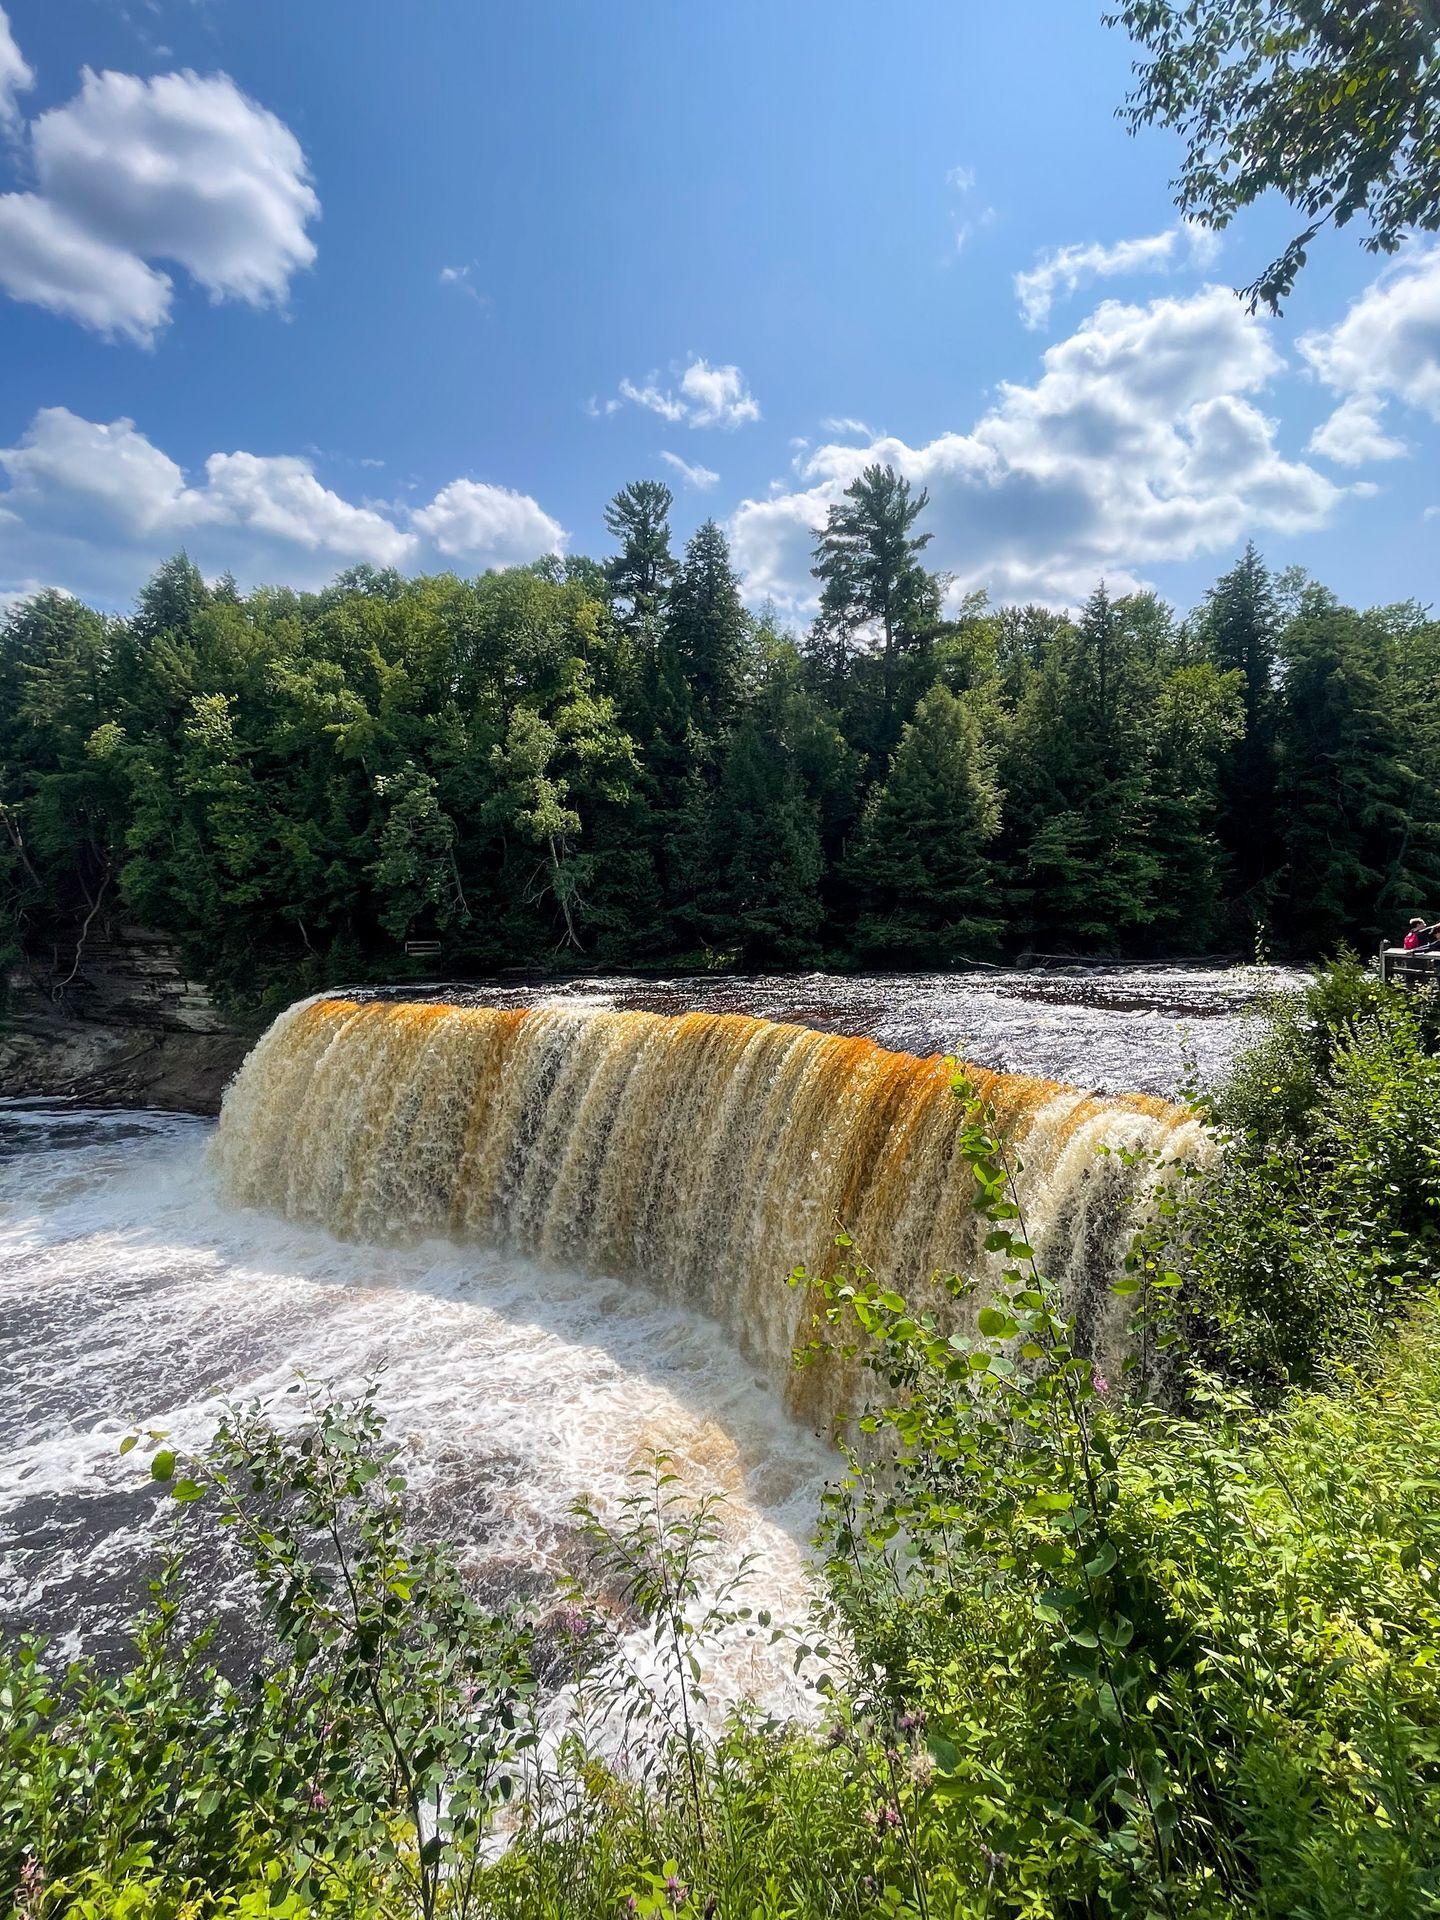 A view of Upper Falls at Tahquamenon Falls State Park. It's a tall waterfall with an amber color and there are tall trees on both sides of the river.